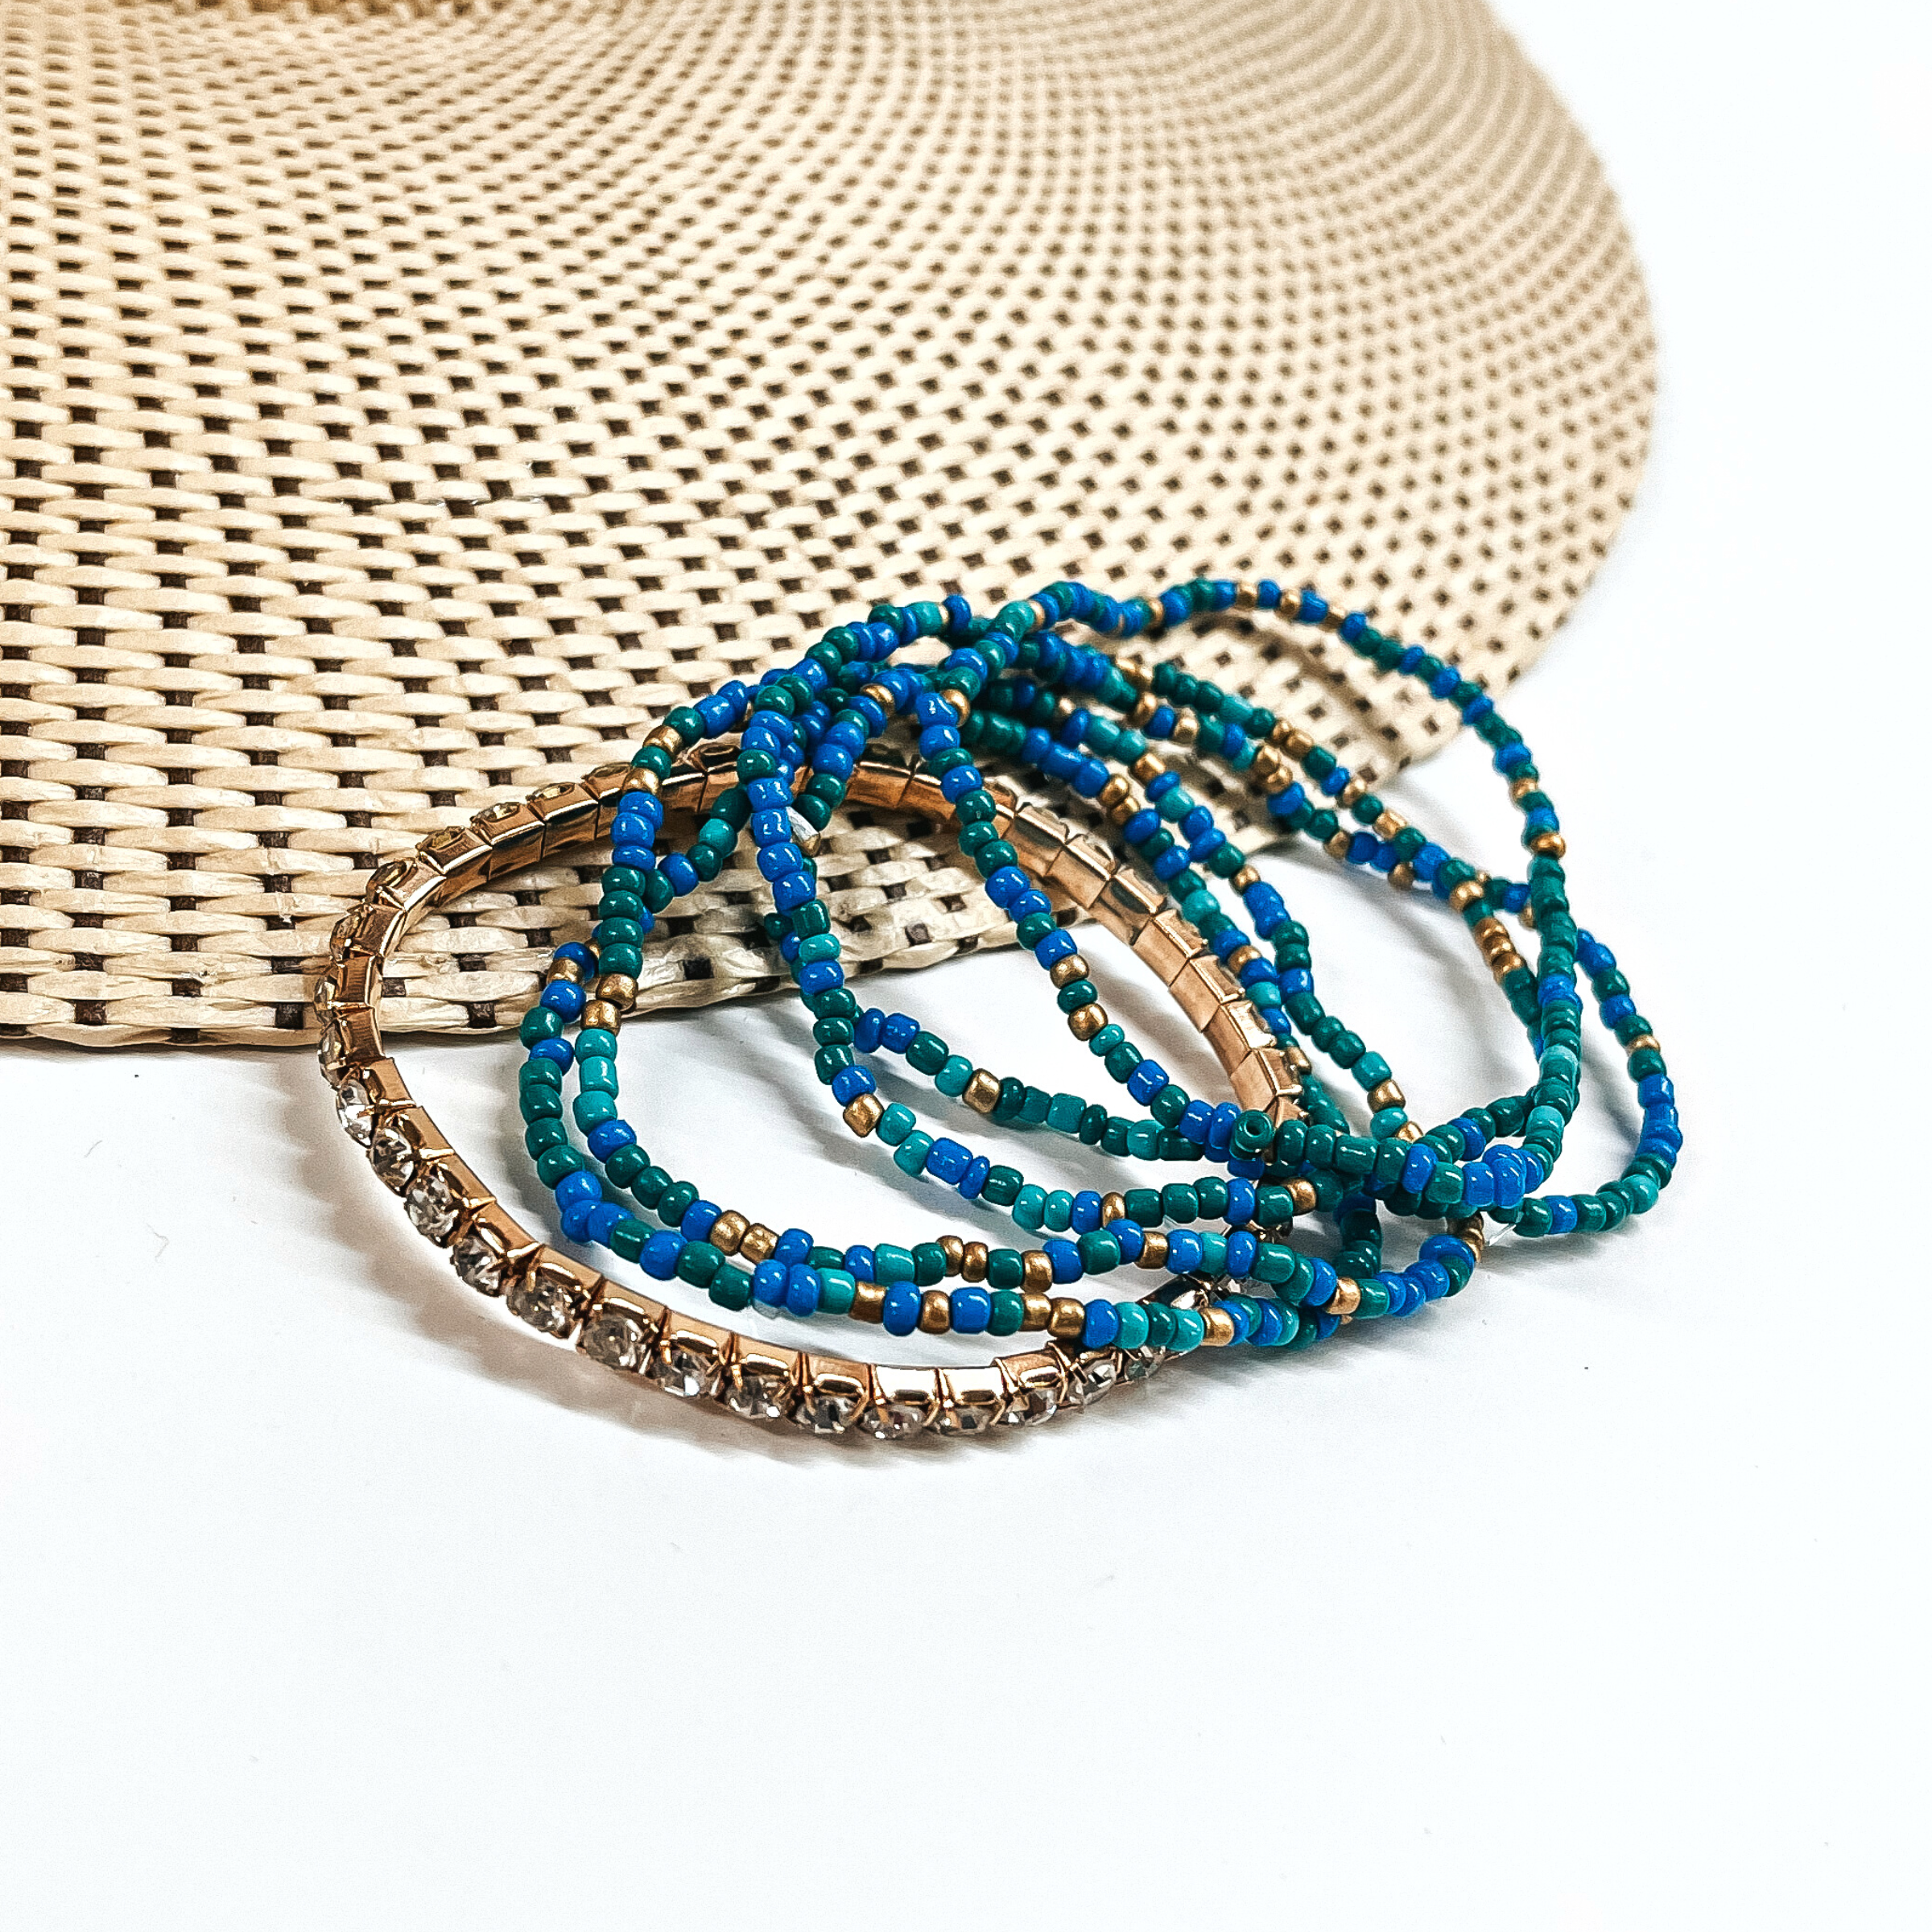 This is a set of six bracelets in a blue/teal mix. There are five seedbeaded bracelets in blue, teal, green, ad gold. There is a one clear rhinestone bracelet in a gold setting. These bracelets are laying partly on a straw hat and a white background,